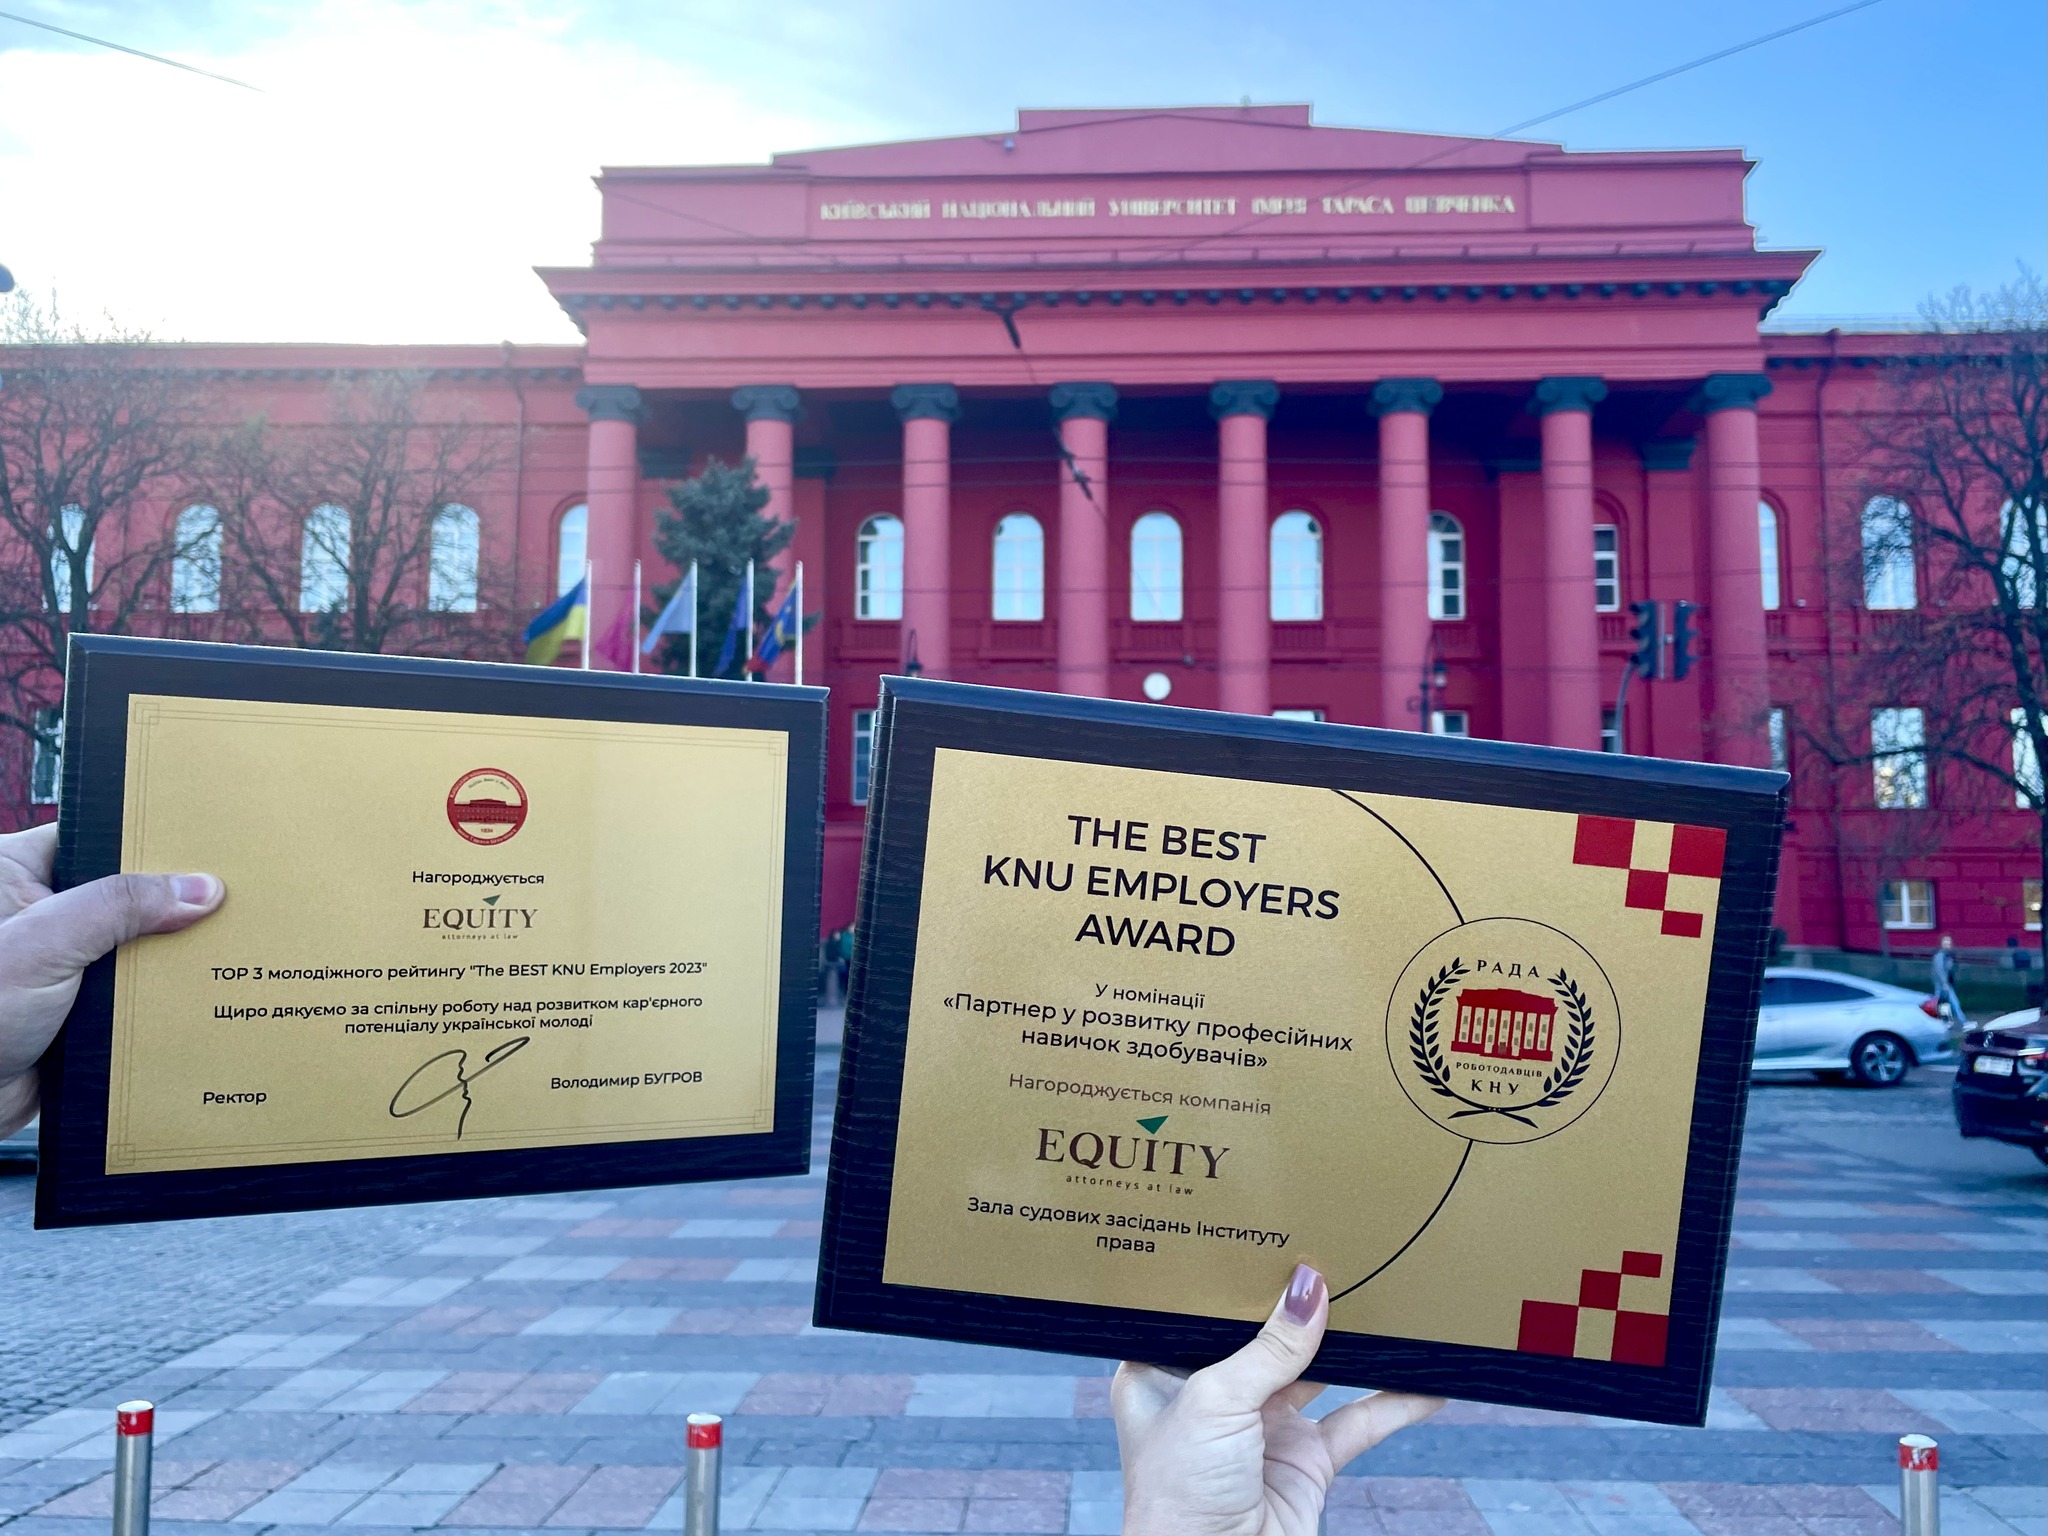 EQUITY ranked among TOP-3 "The best KNU Employers 2023" and received a special award for opening a Сourtroom for students